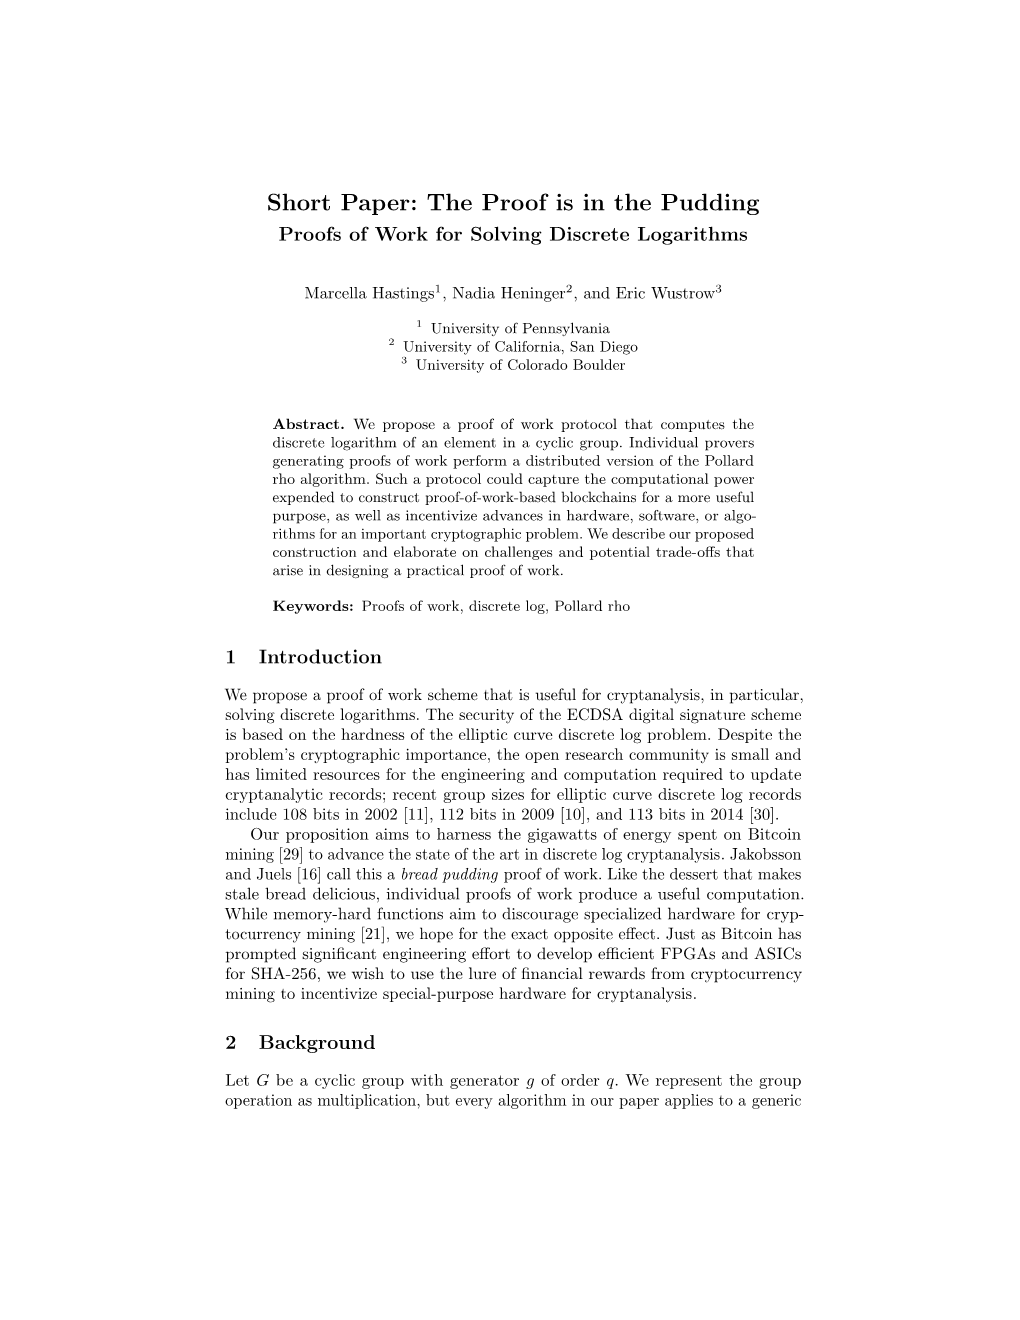 Short Paper: the Proof Is in the Pudding Proofs of Work for Solving Discrete Logarithms